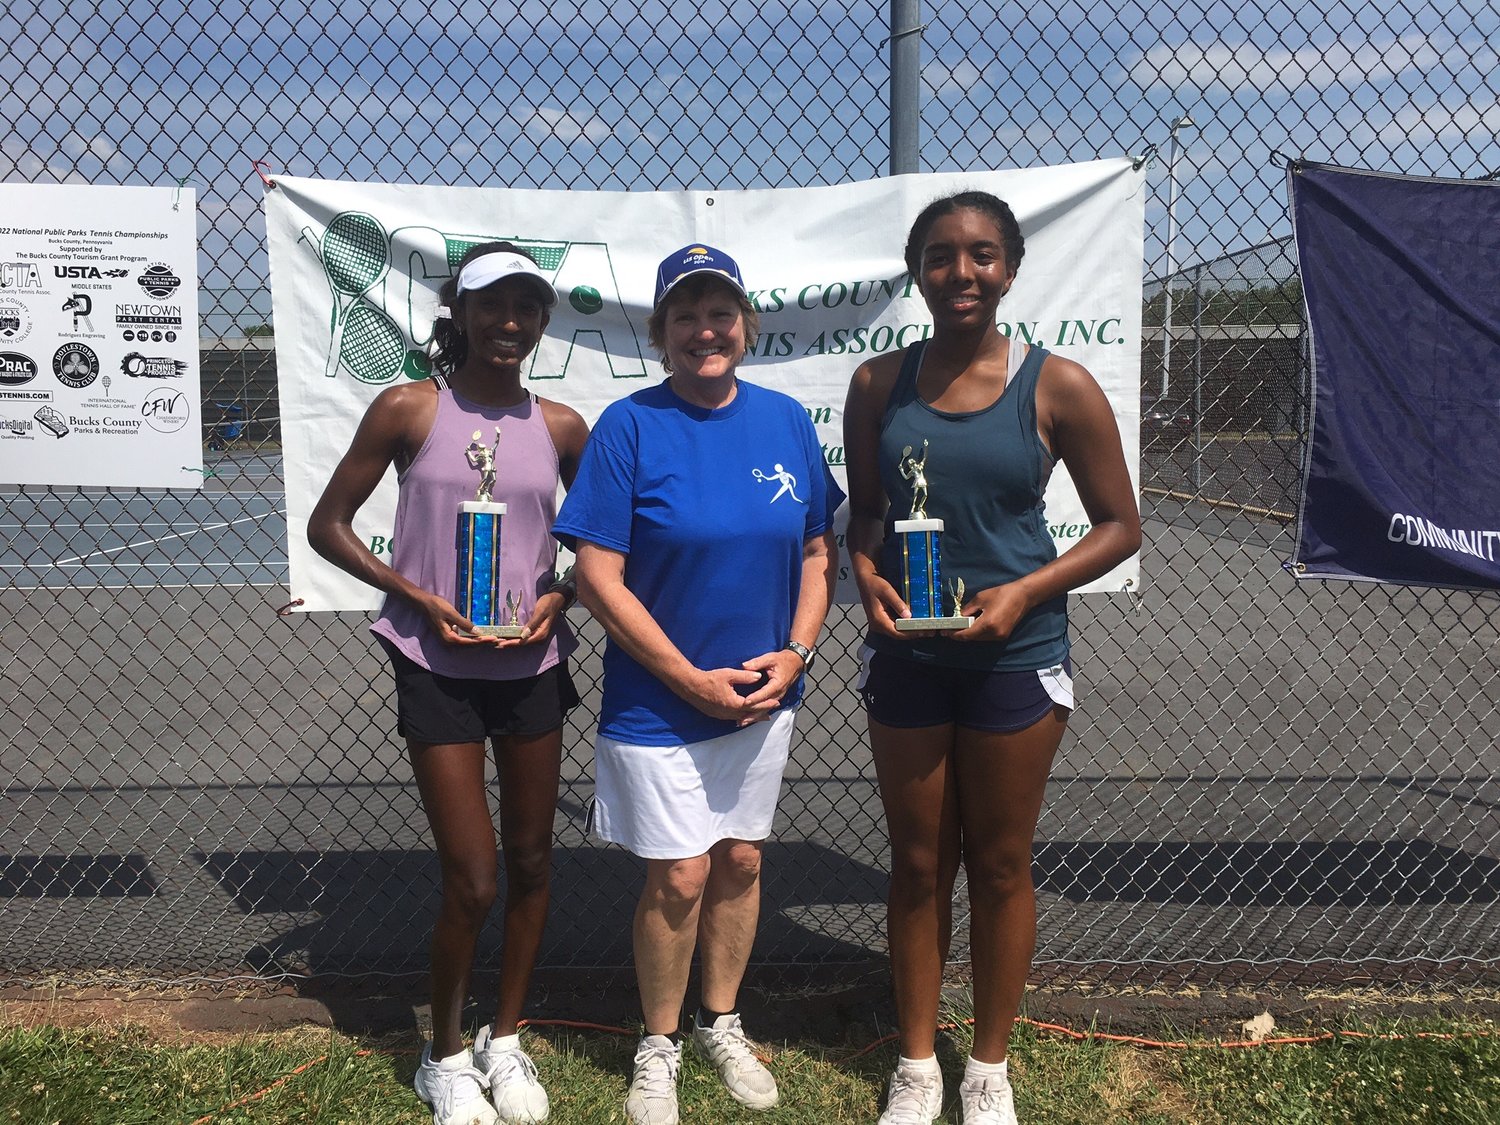 From left are: Girls 18 champion Nilaa Ponnappan, Laura Canfield, tournament director and USTA vice president, and finalist Laurie Fleming.